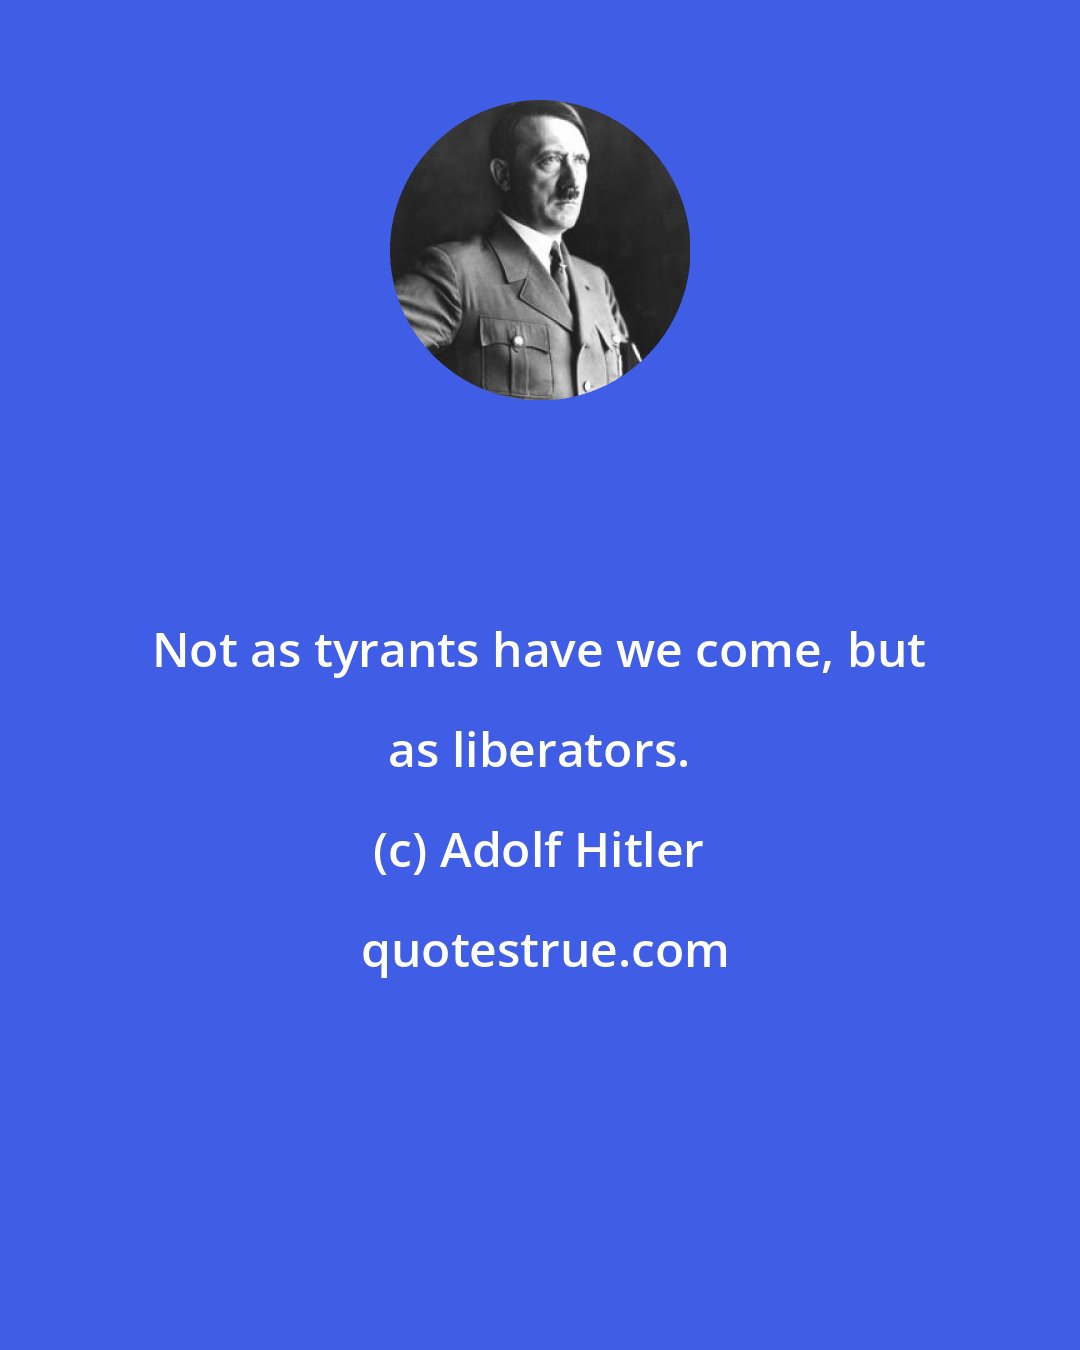 Adolf Hitler: Not as tyrants have we come, but as liberators.